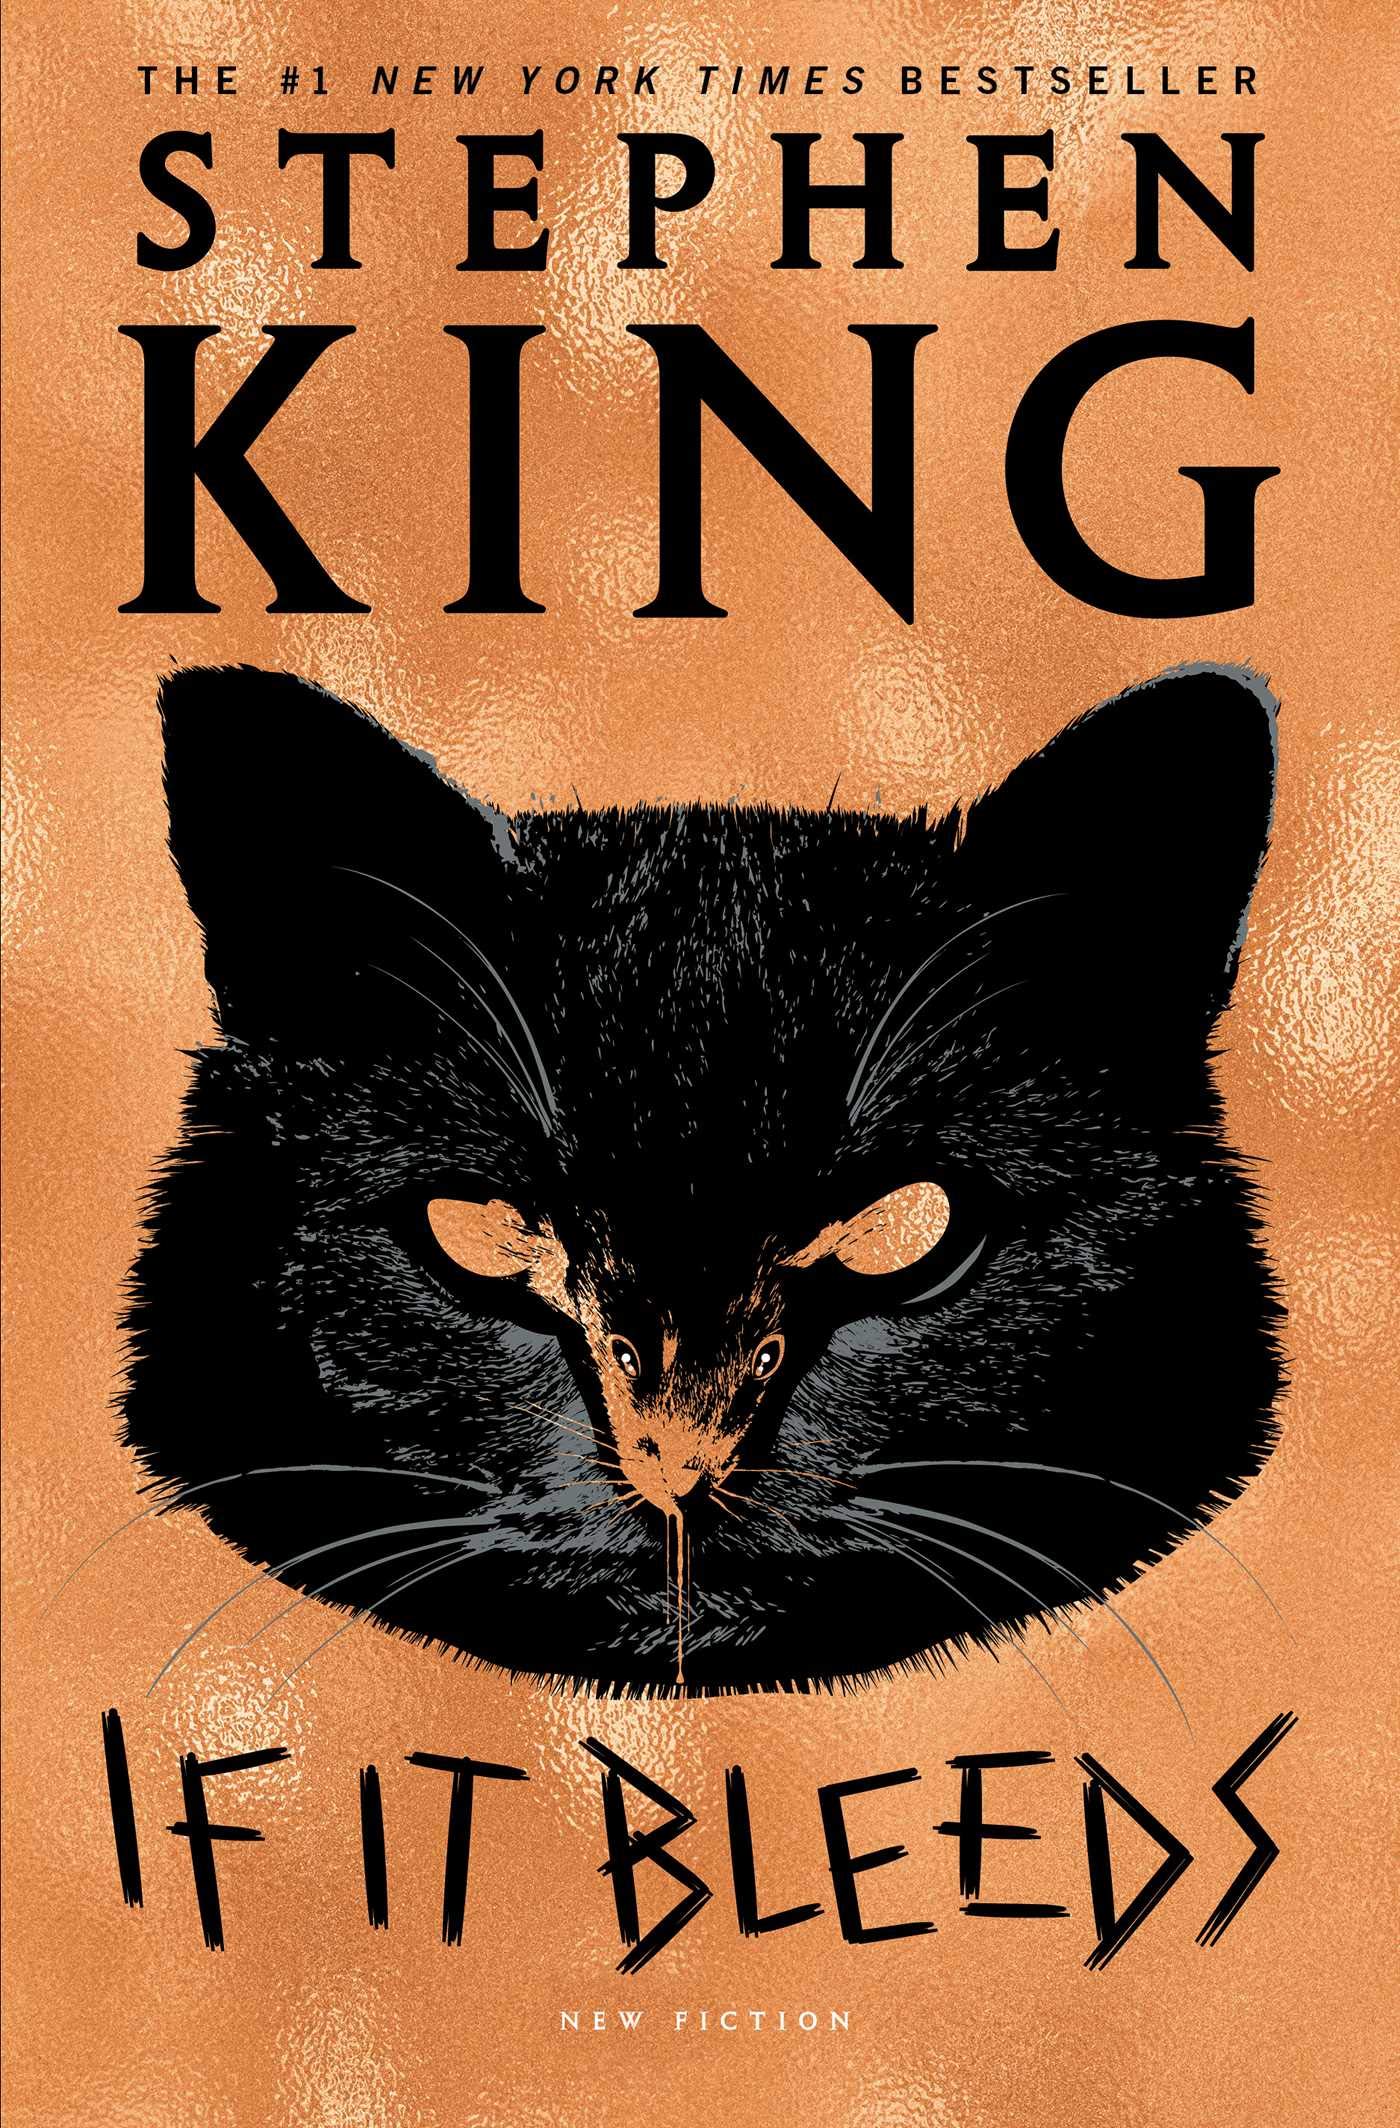 Cover of "If It Bleeds" by Stephen King